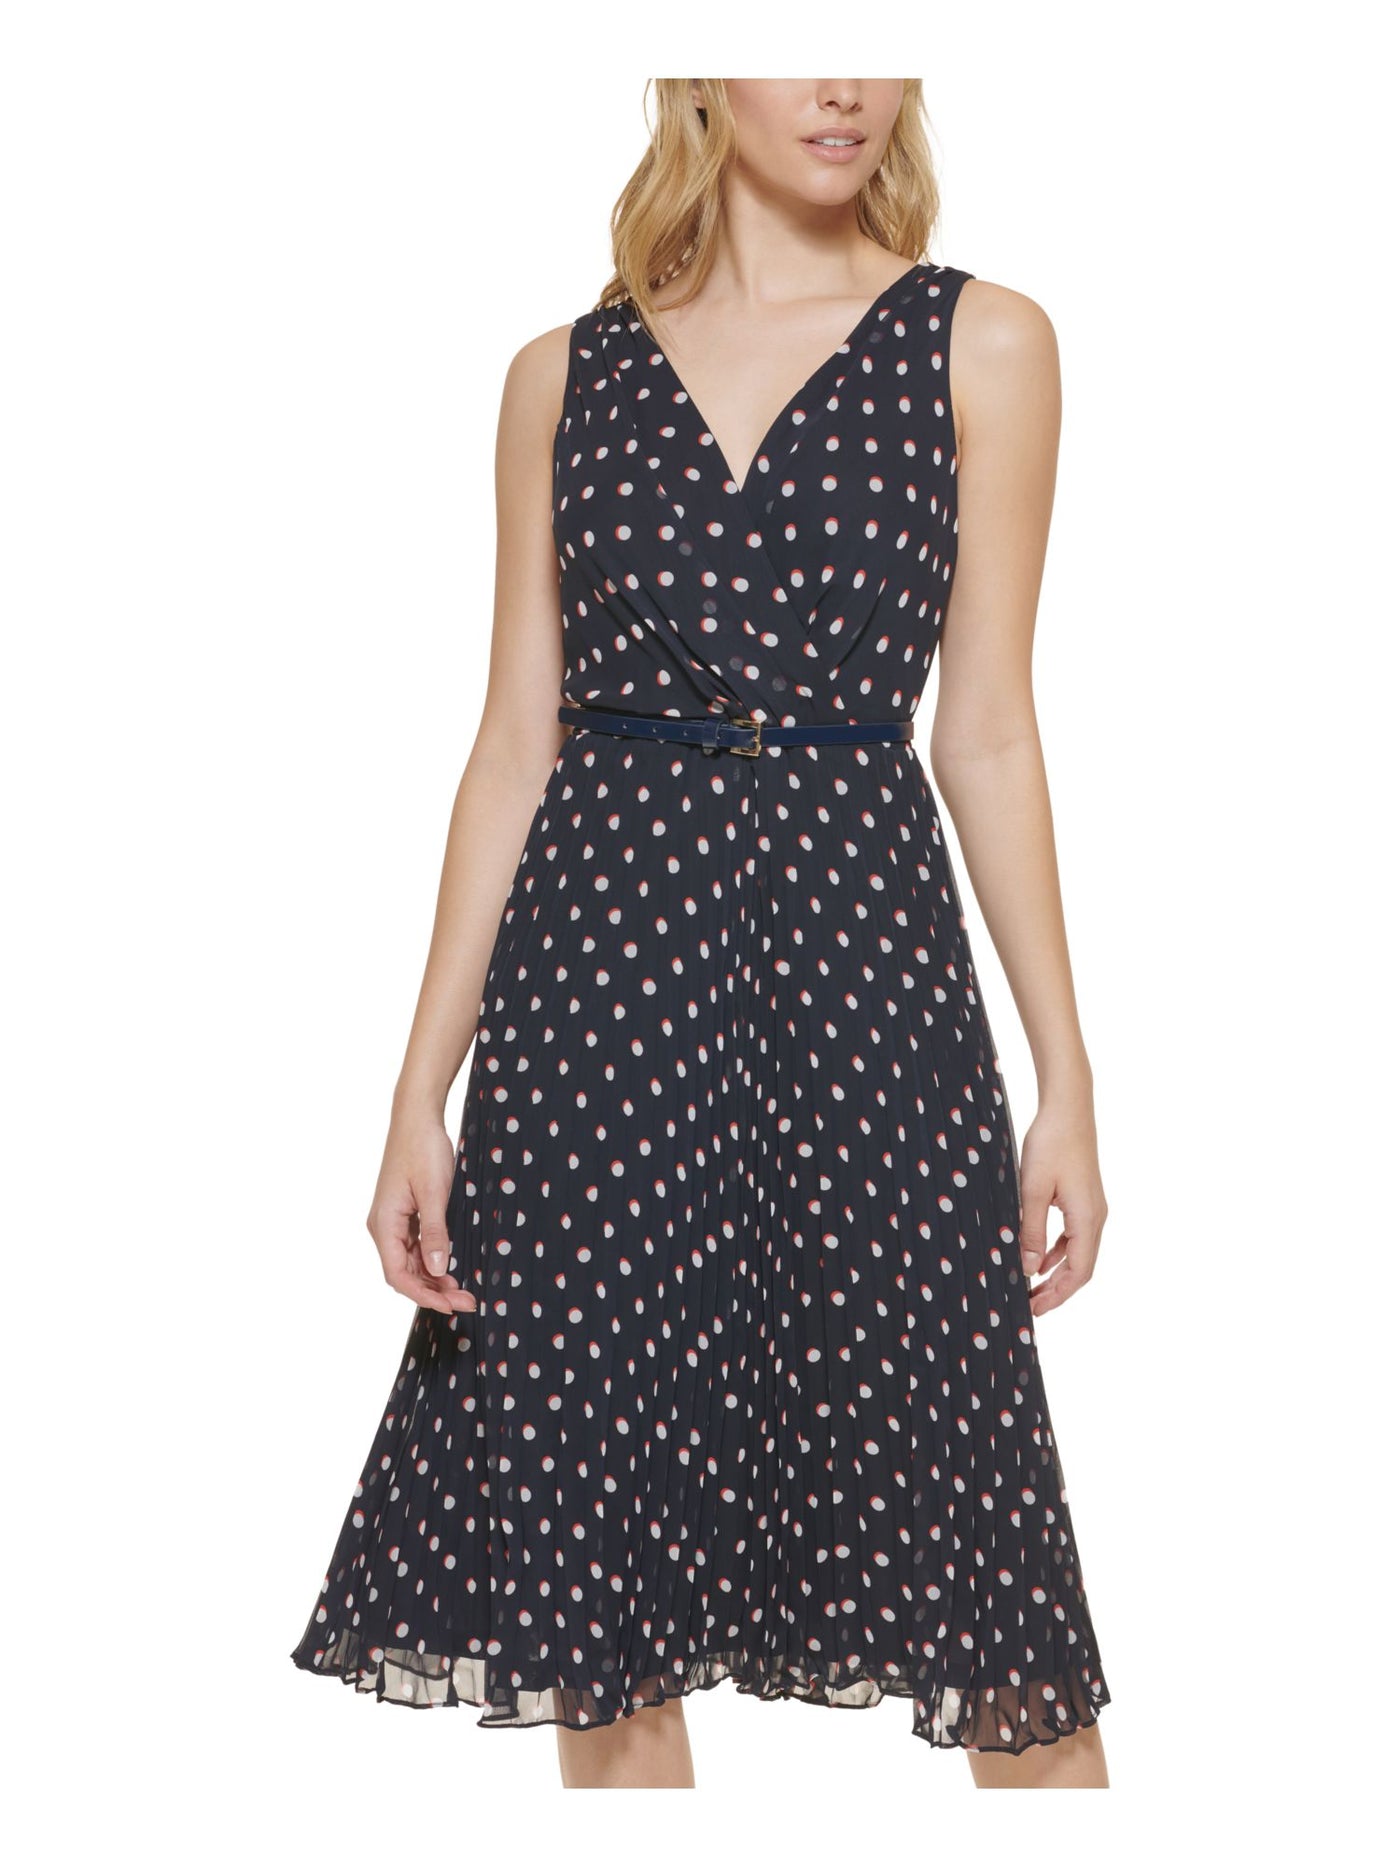 TOMMY HILFIGER Womens Navy Belted Zippered Sheer Lined Pleated Polka Dot Sleeveless Surplice Neckline Below The Knee Fit + Flare Dress Petites 12P